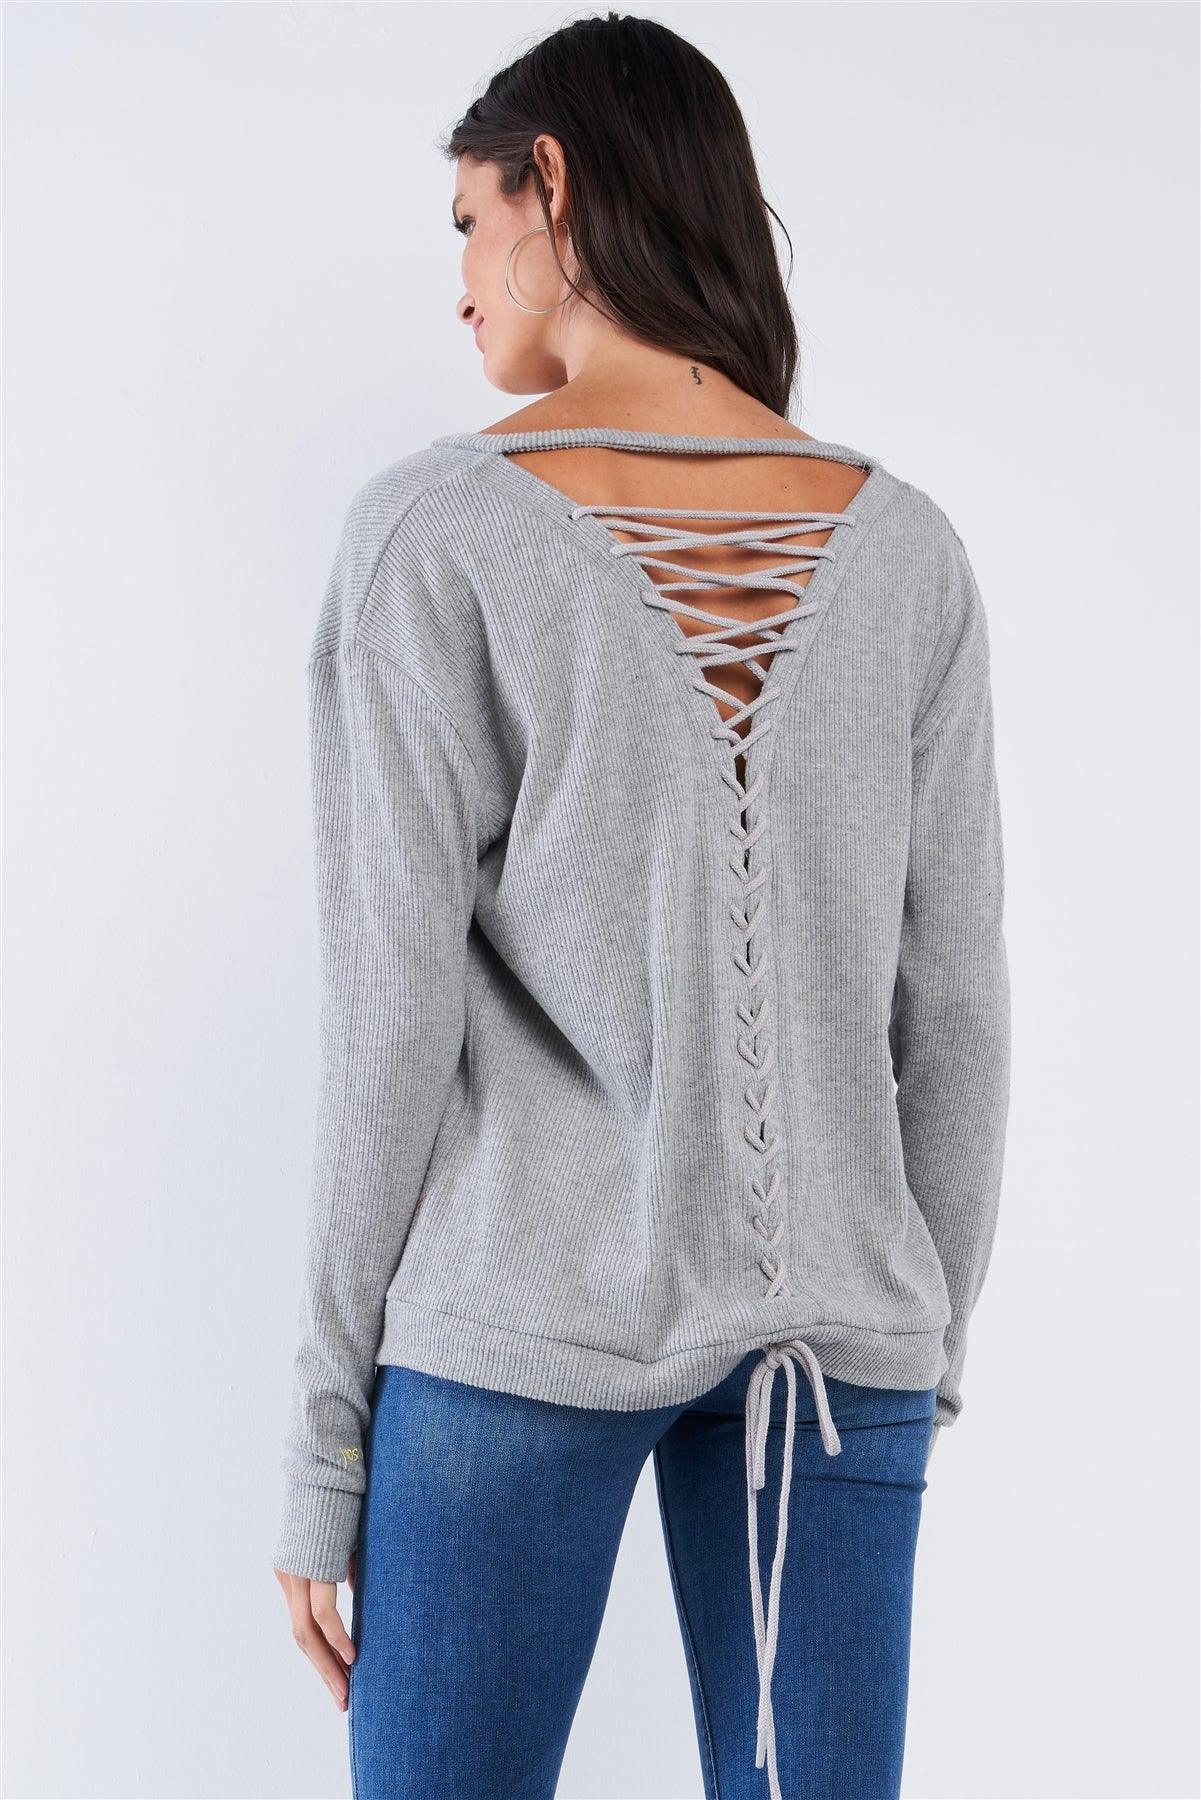 Heather Grey Long Sleeve V-Neck Ribbed Knit Lace Up Tie Back Detail Top /3-2